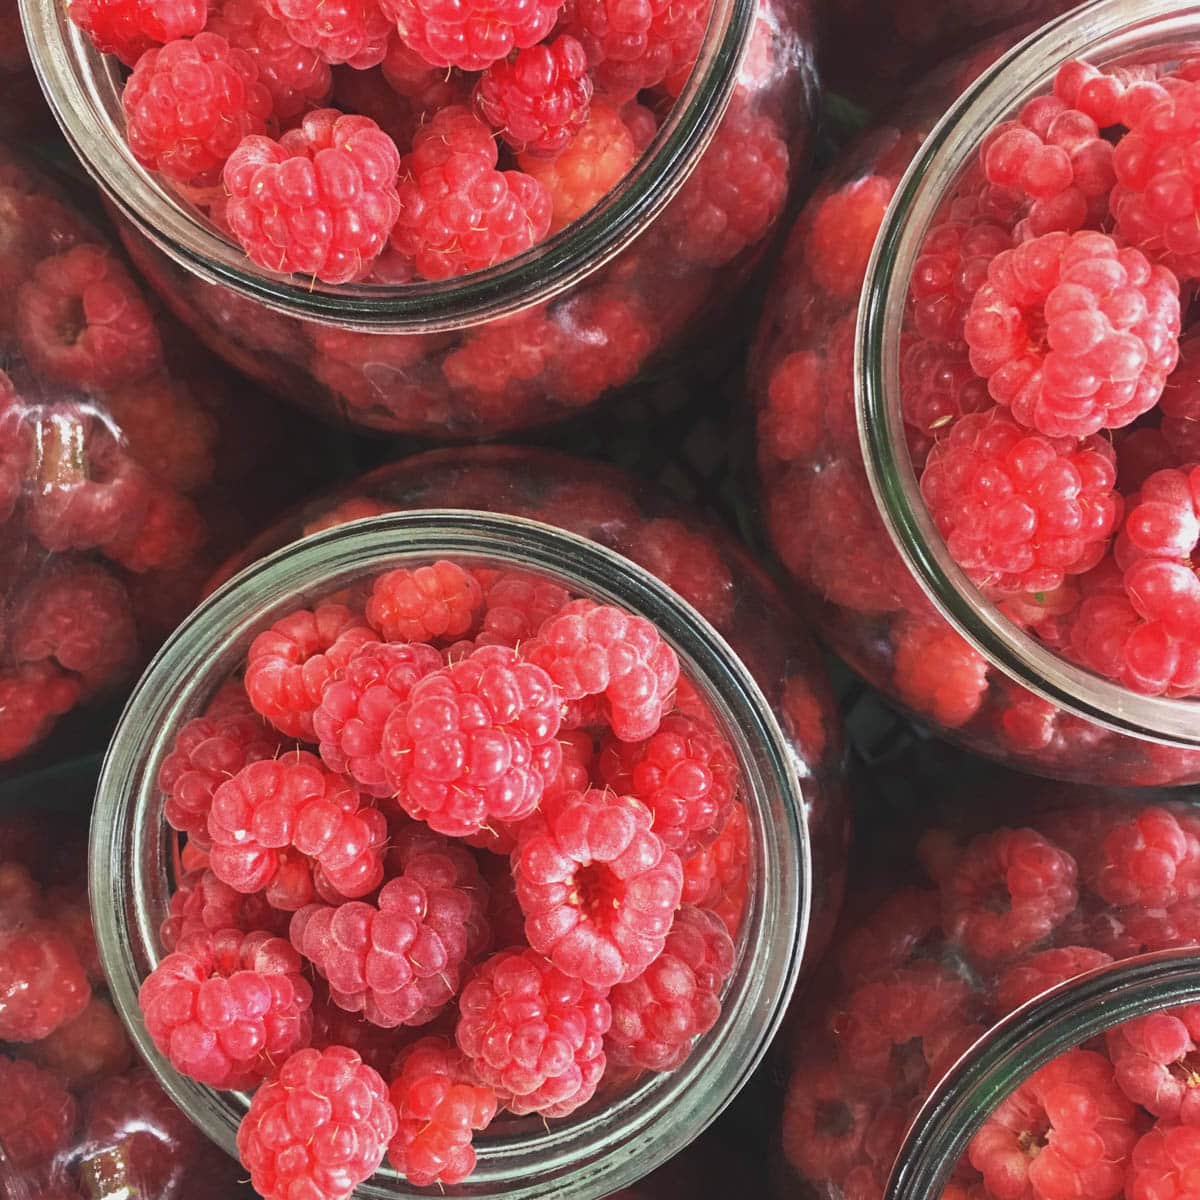 Top view of many mason jars filled with fresh raspberries.